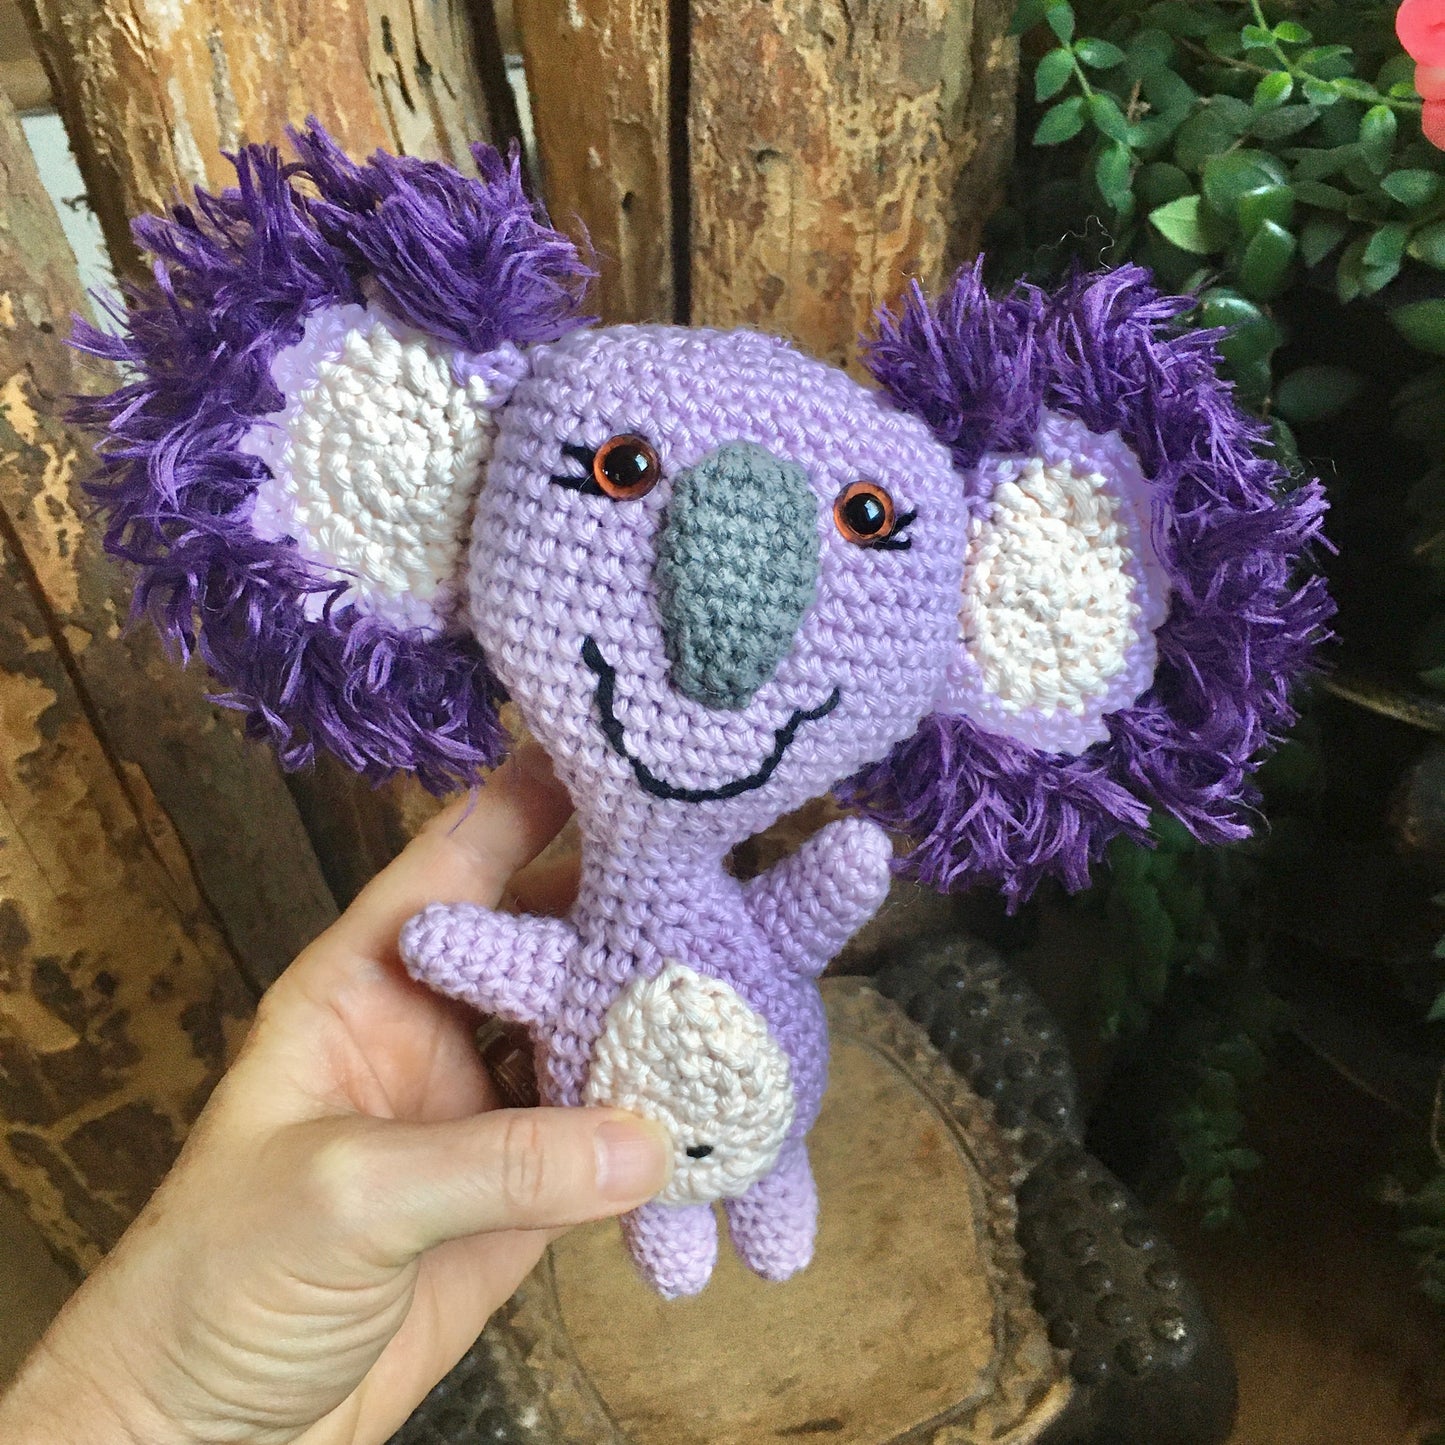 The Koa-Lala, crochet boss to download, French and English PDF, a little koala with 2 faces ... A joyful side and a sadder side.